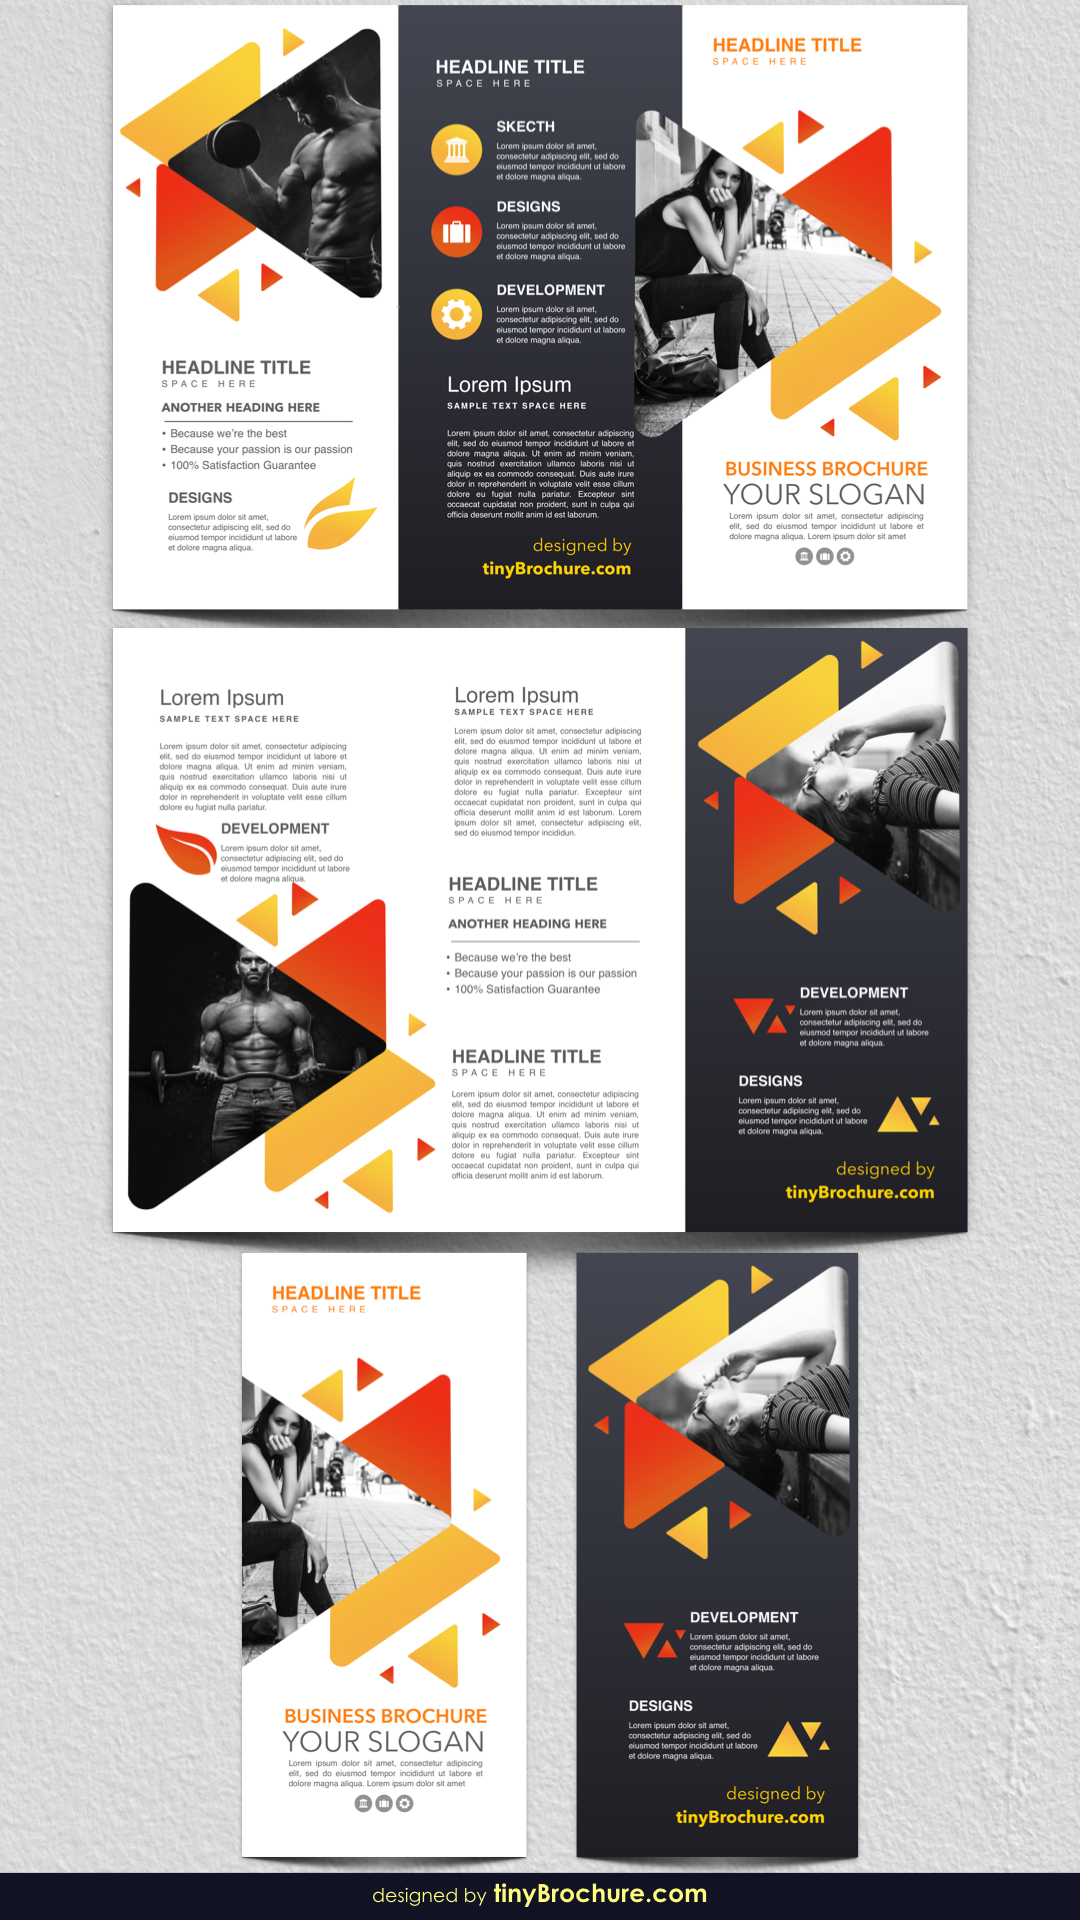 3 Panel Brochure Template Google Docs 2019 | Rack Card Intended For One Page Brochure Template